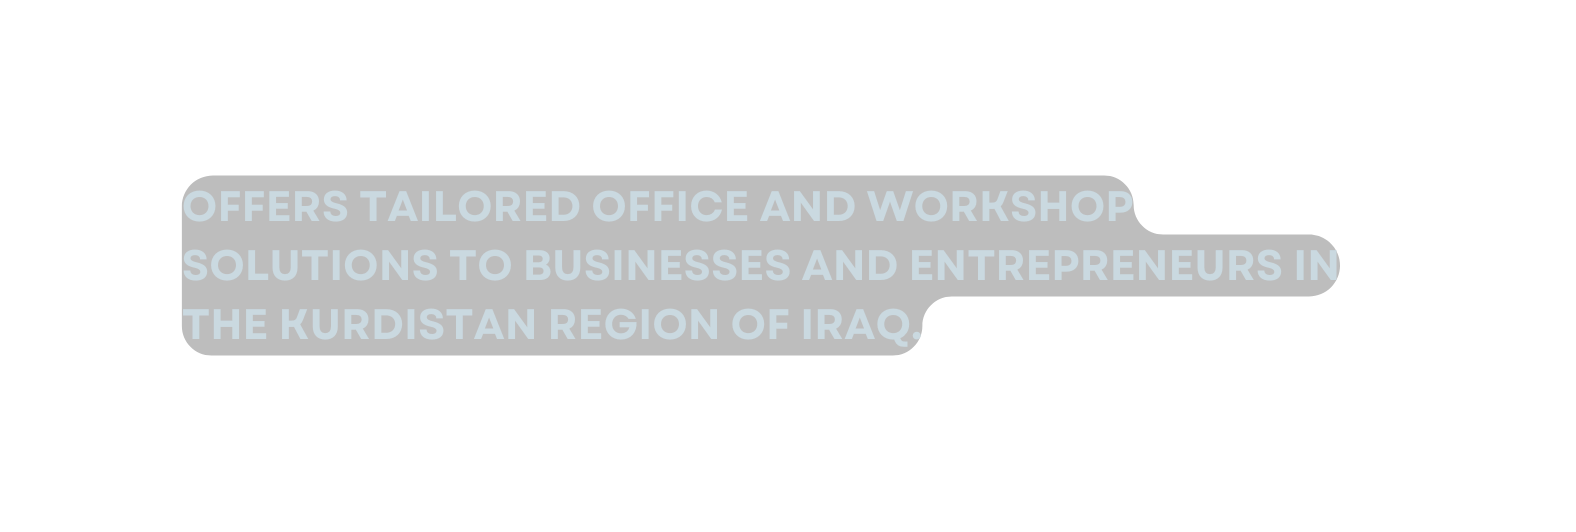 Offers tailored office and workshop solutions to businesses and entrepreneurs in the Kurdistan Region of Iraq